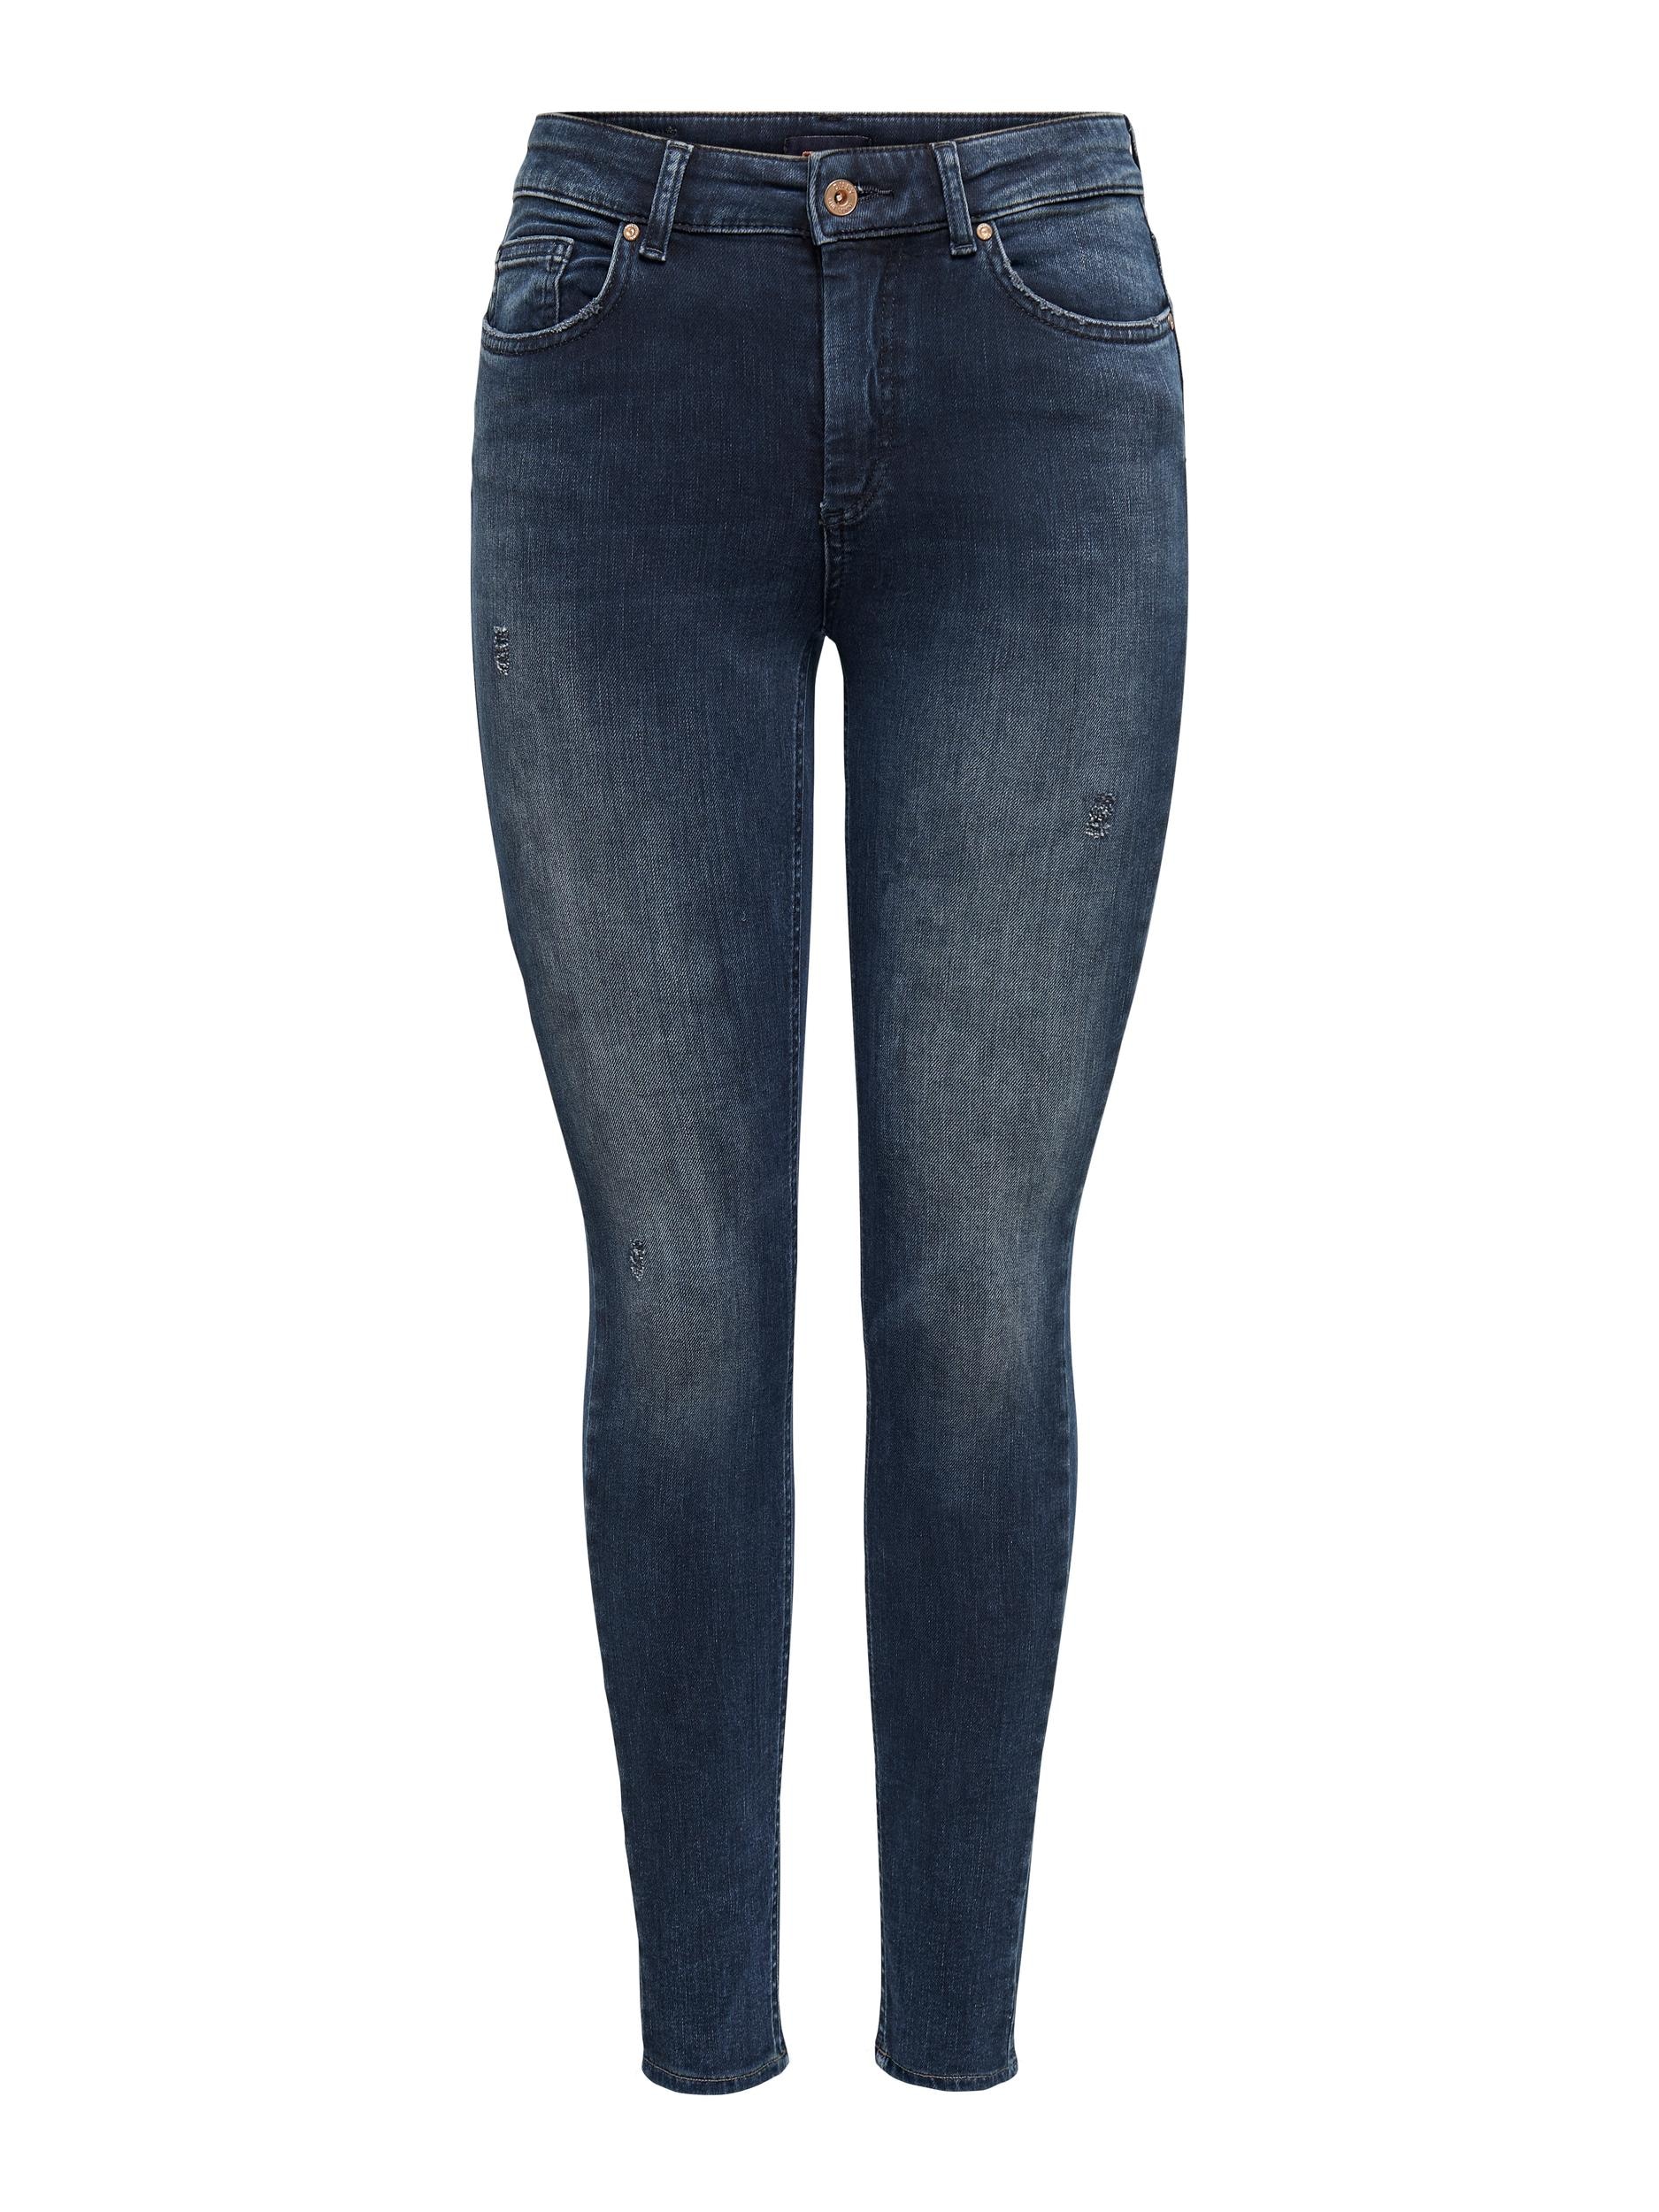 ONLY Skinny-fit-Jeans »ONLBLUSH REA409 ♕ SKINNY NOOS« MID DNM bei